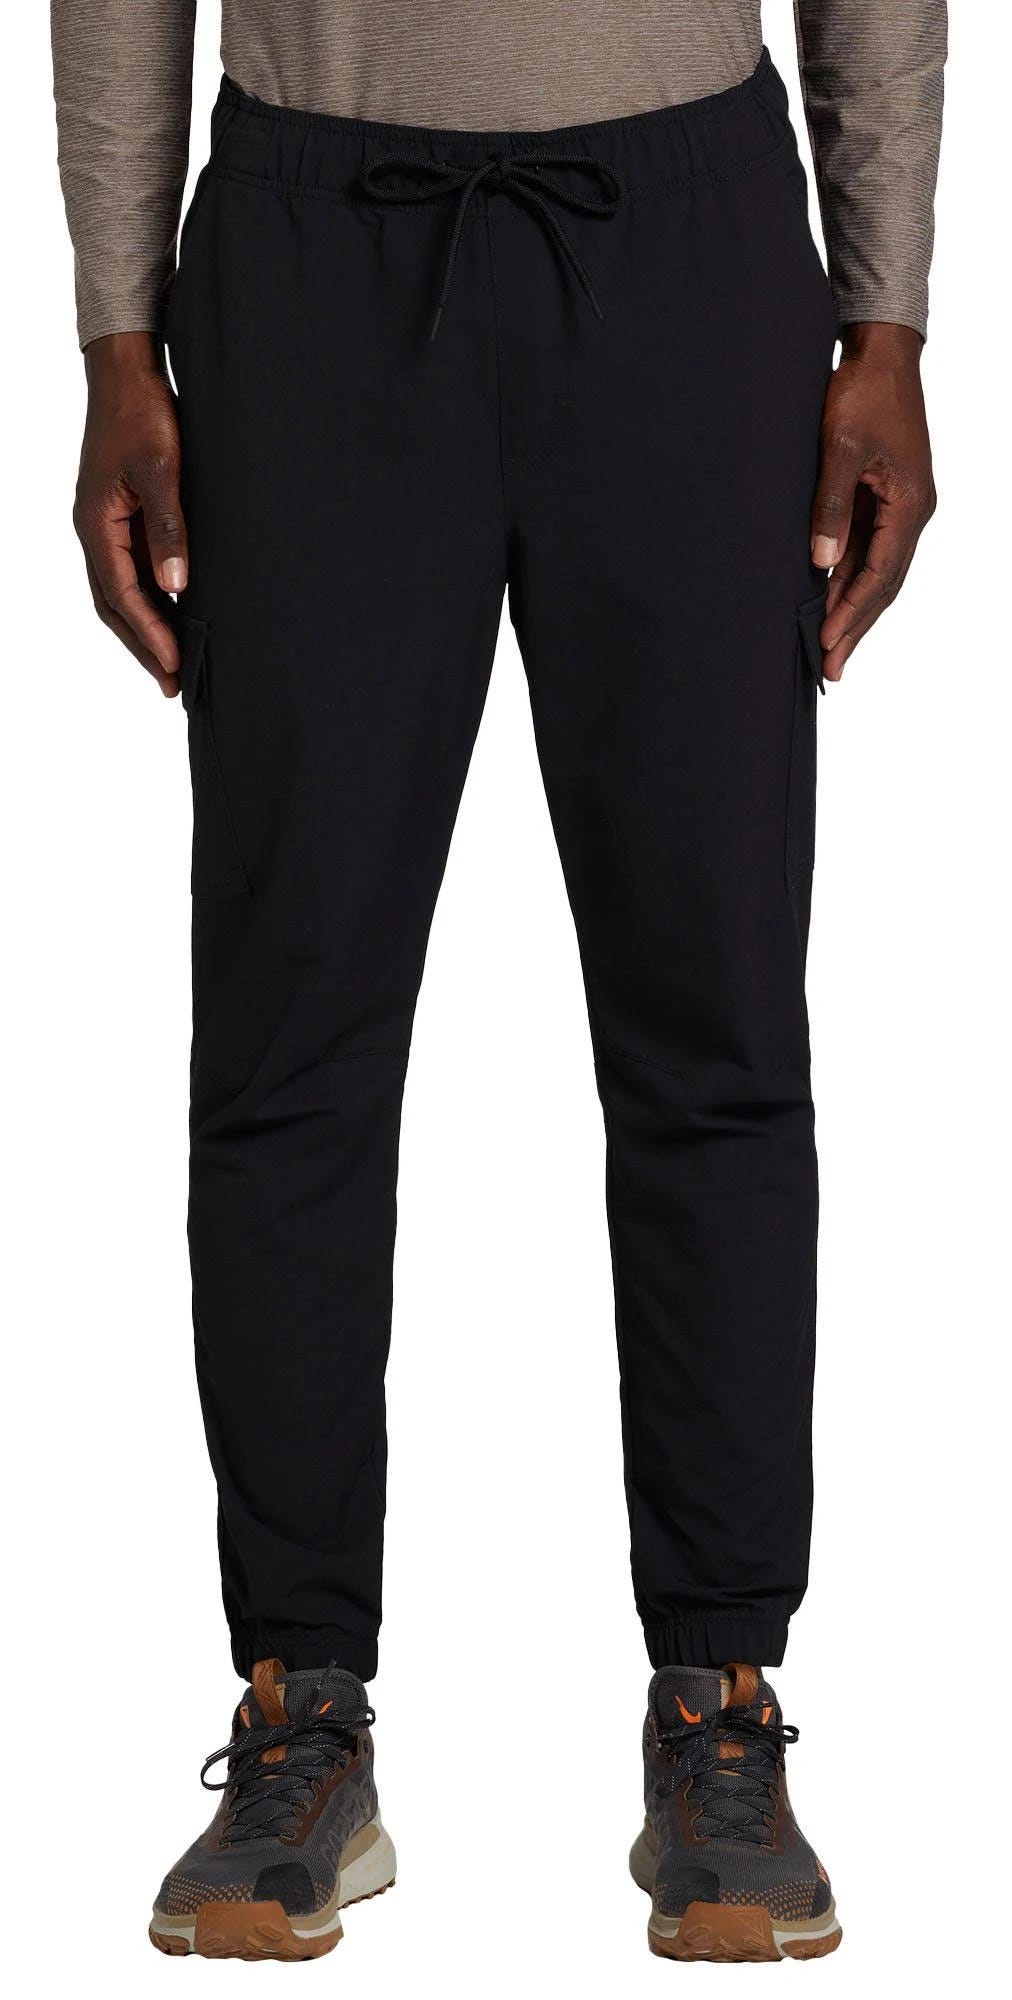 Comfortable Black Cargo Jogger Pants with Flex Stretch and UPF 50+ Protection | Image